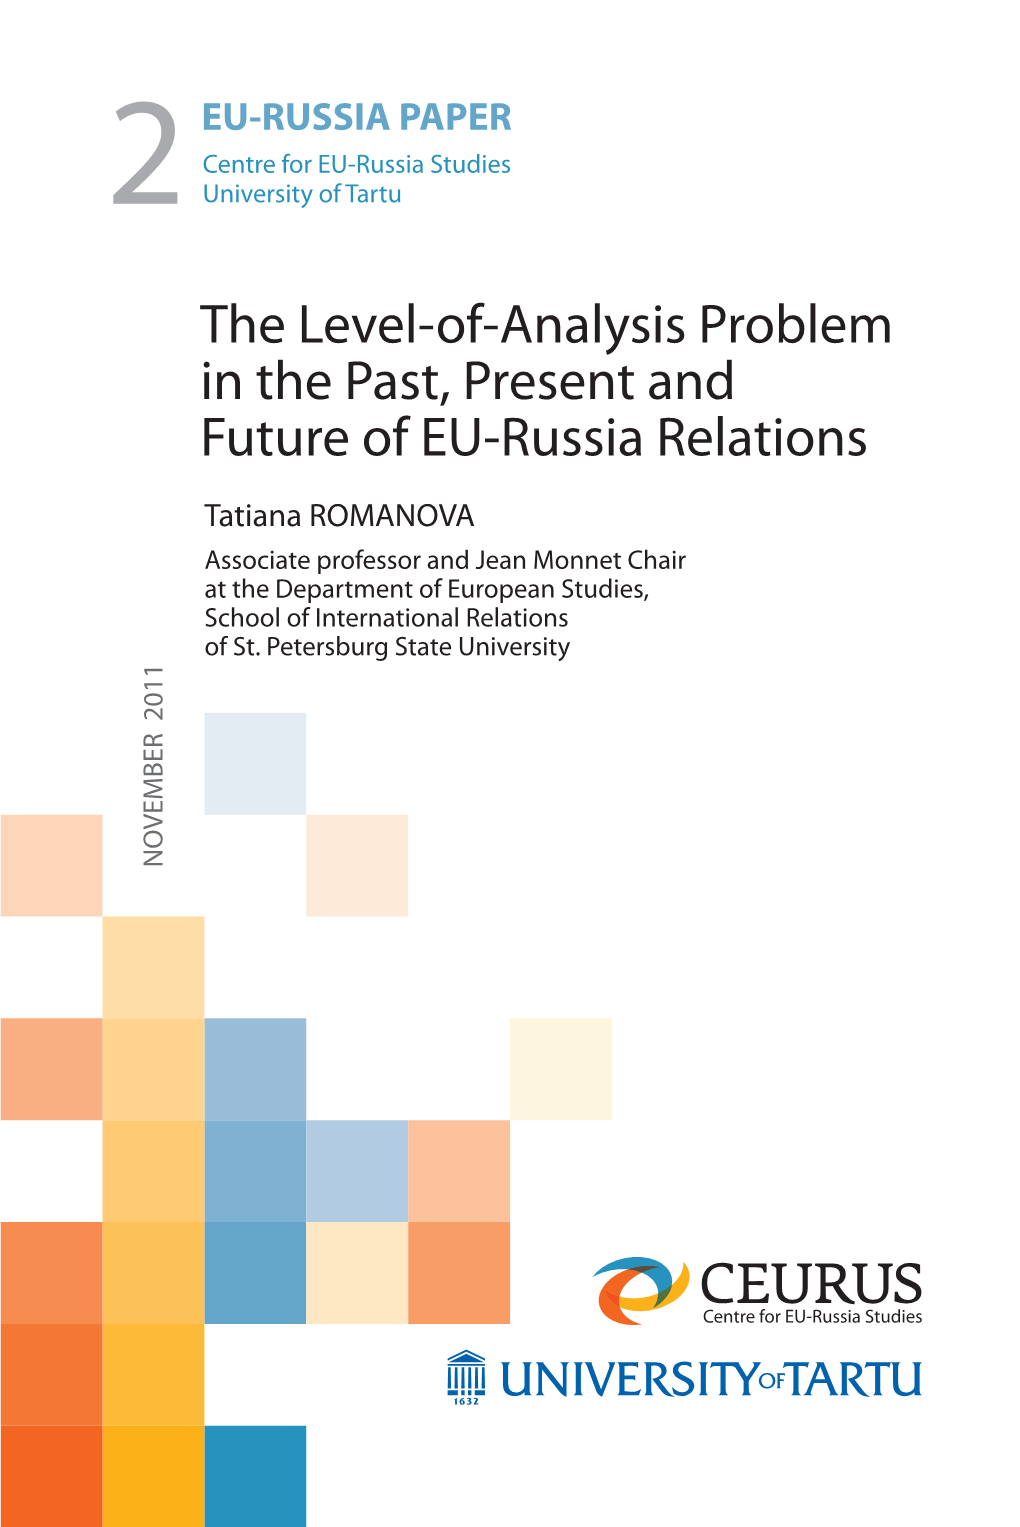 The Level-Of-Analysis Problem in the Past, Present and Future of EU-Russia Relations